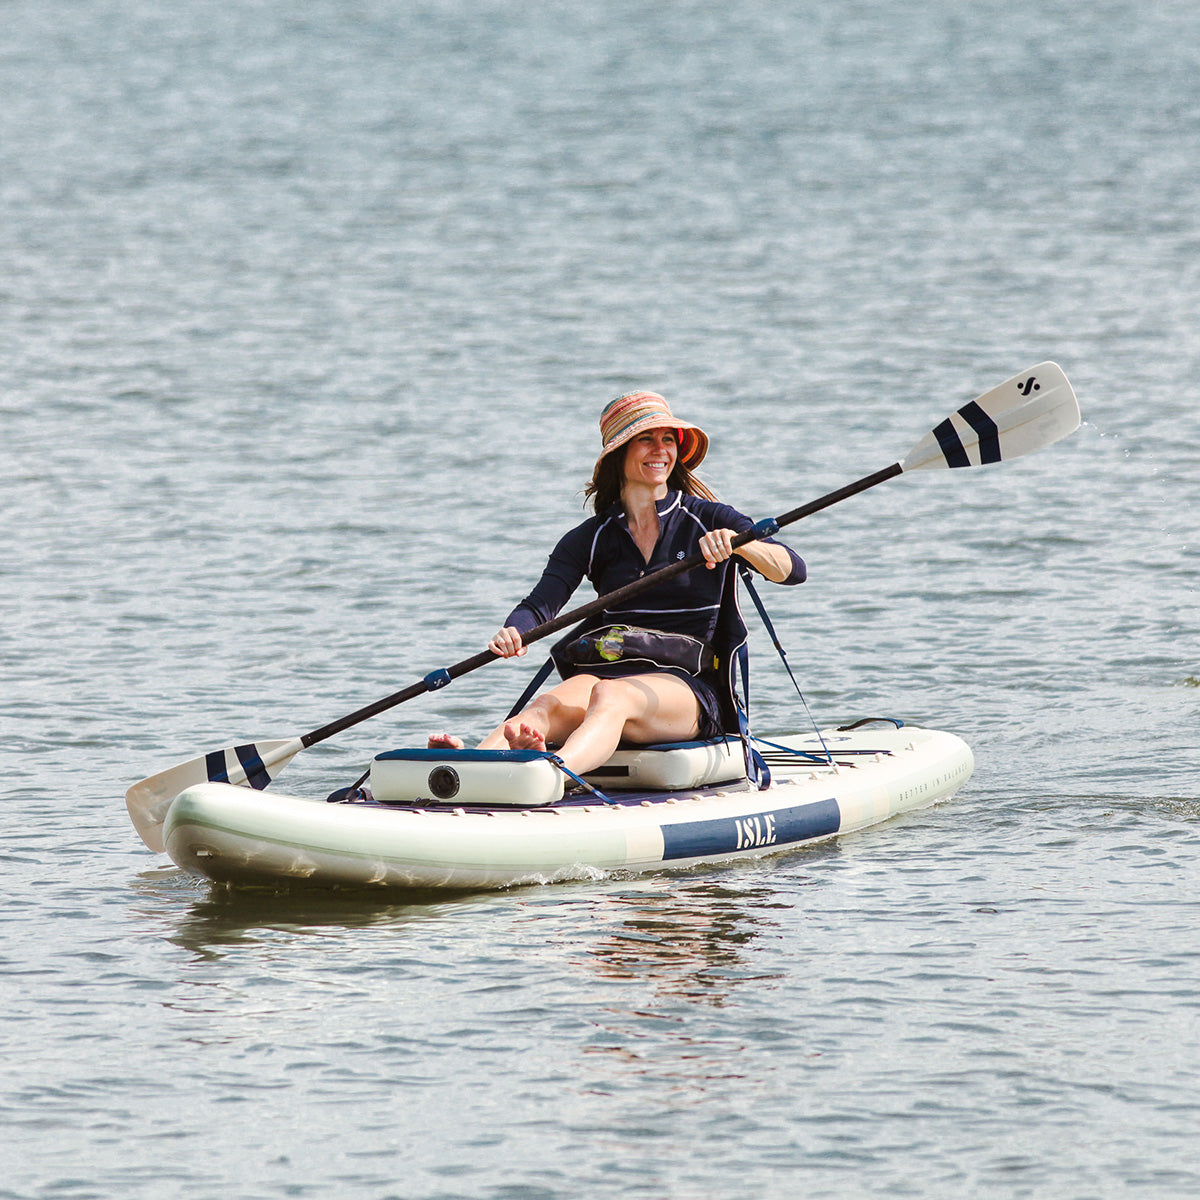 ISLE Sportsman Inflatable Fishing SUP Board Review 